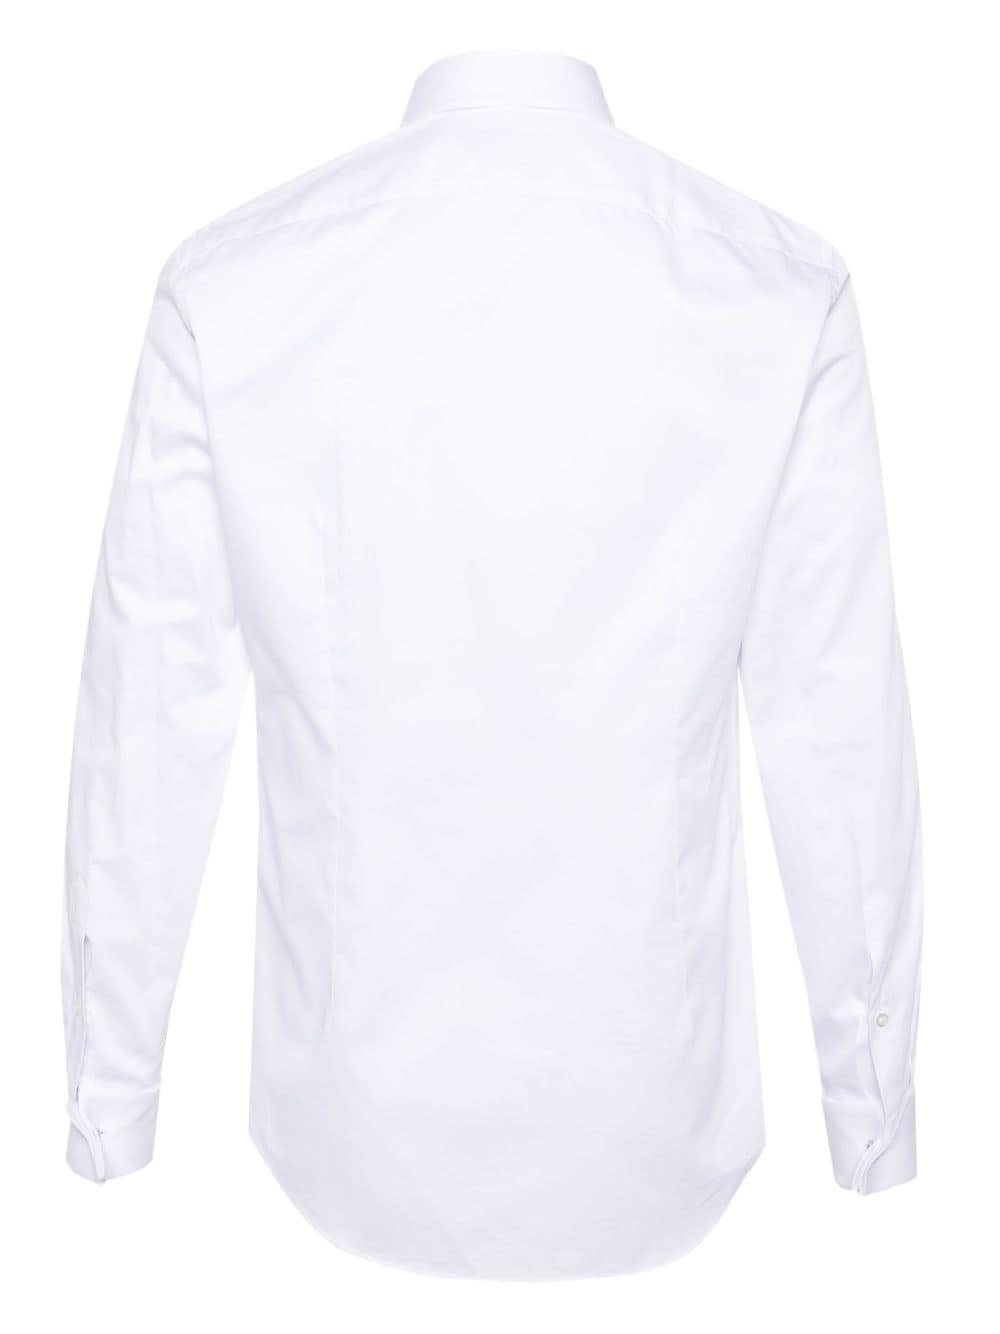 White shirt with French cuffs